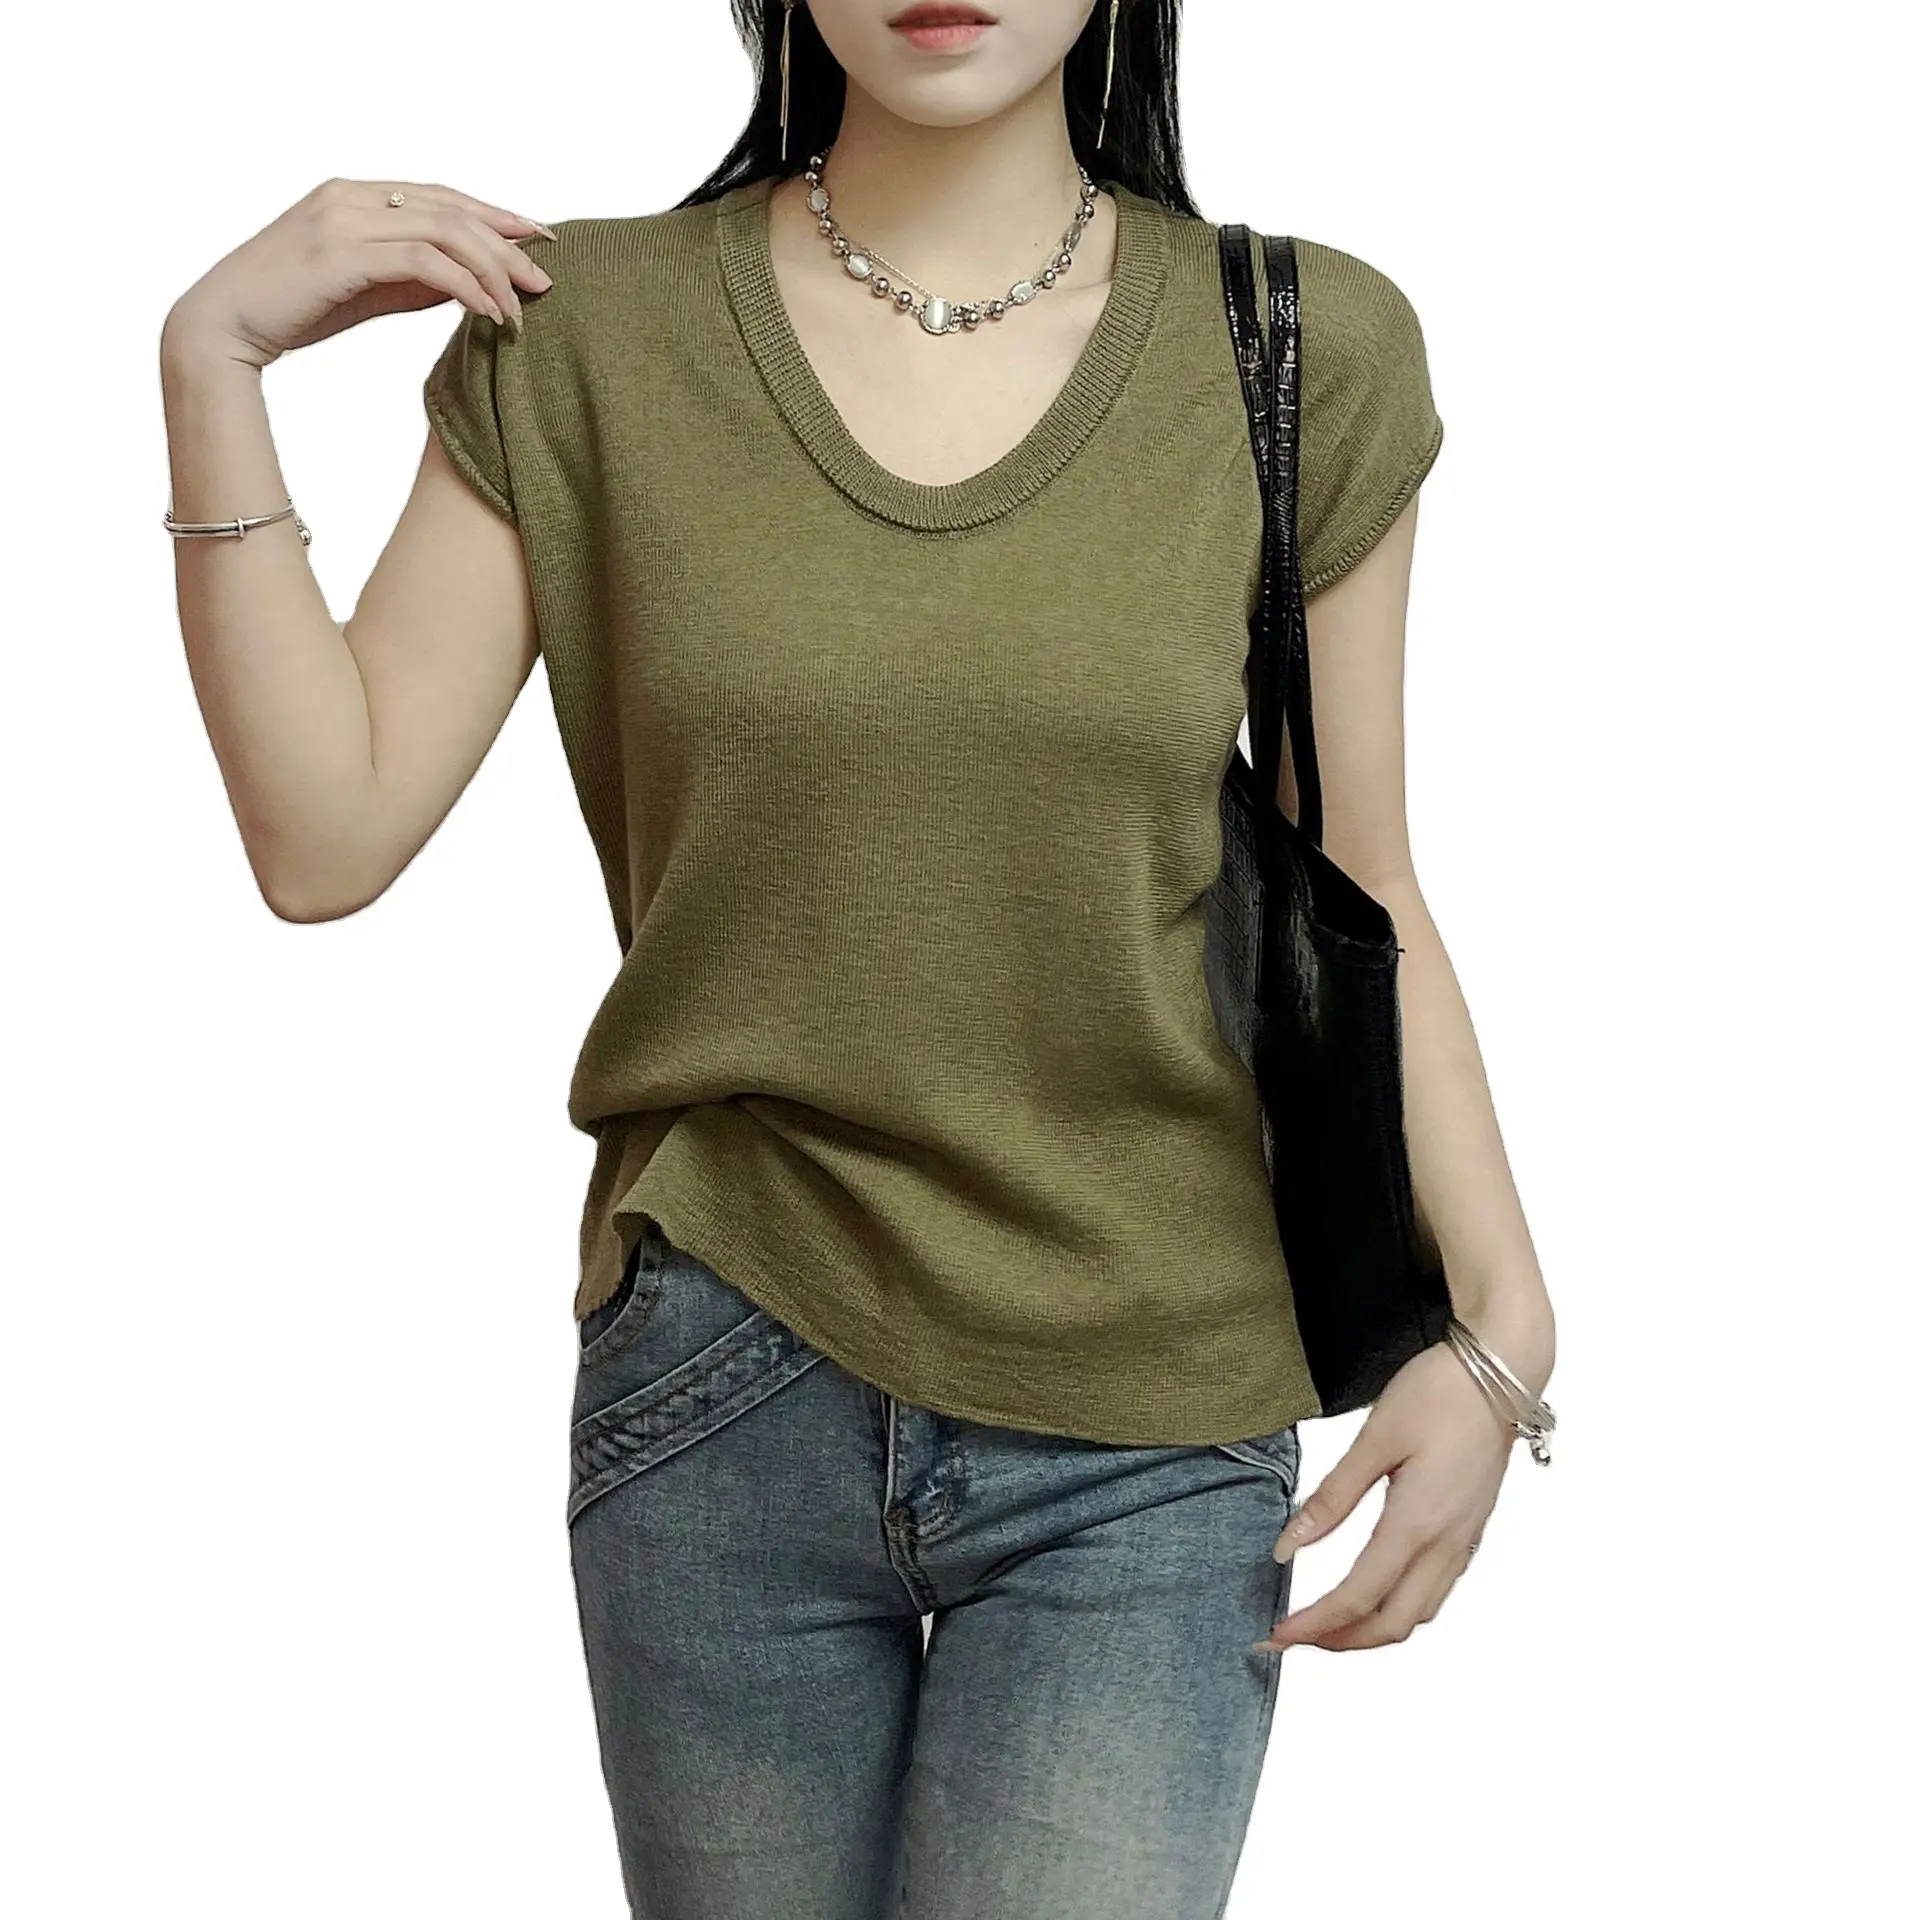 Superior Quality Women's Short Sleeve V-Neck Tunic Knit Top Cotton Knitted Cap Sleeve Slimming Tee In Black women T-shirt